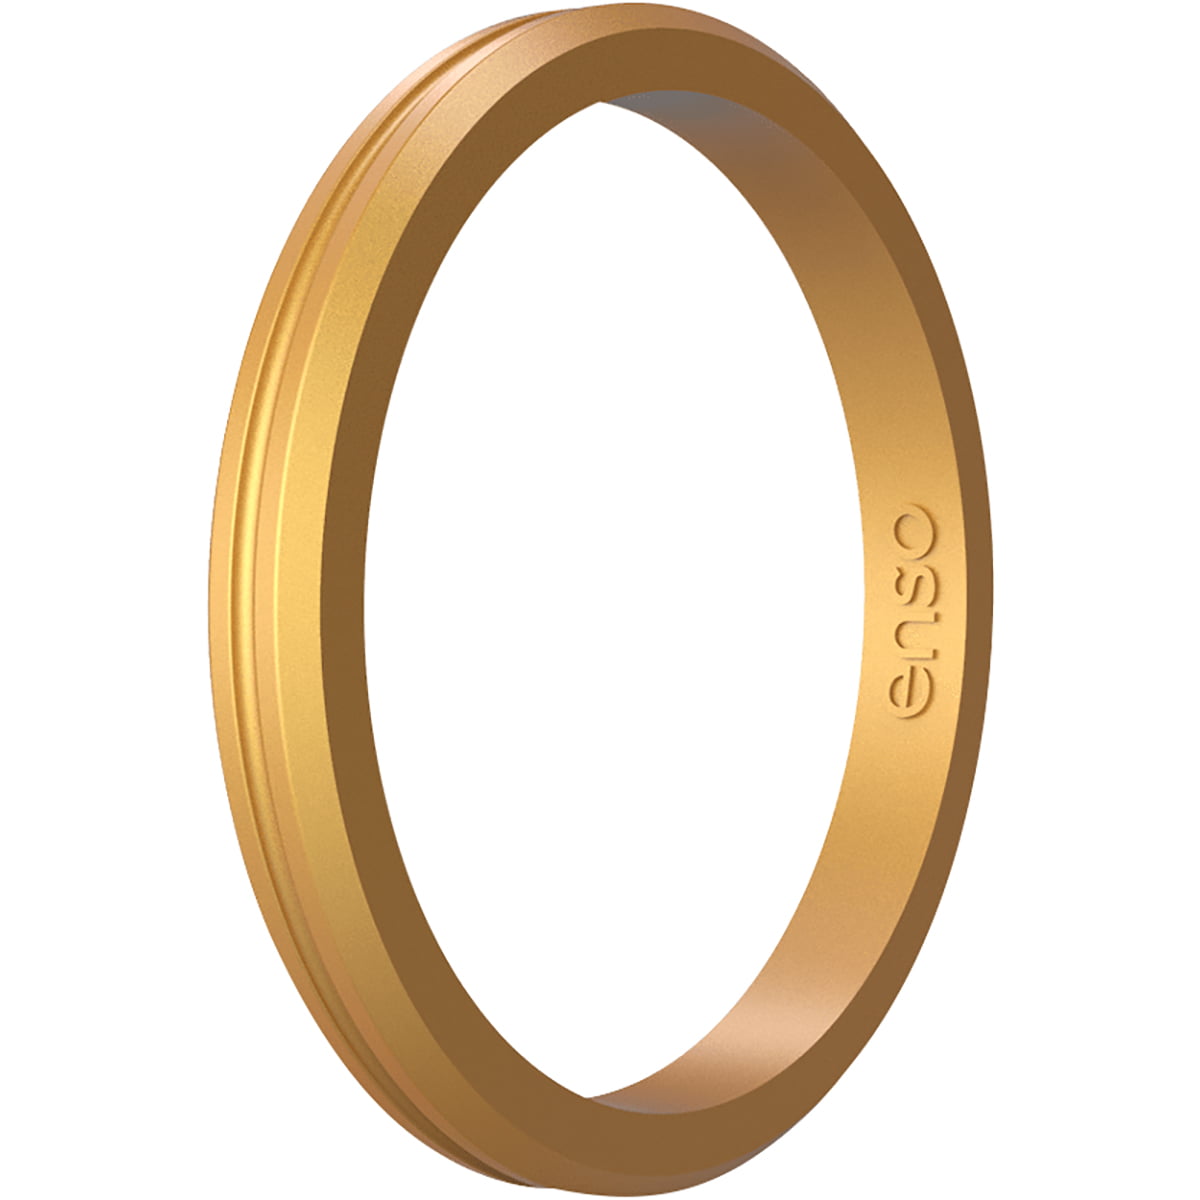 Elements Classic Halo Silicone Ring - Rose Gold